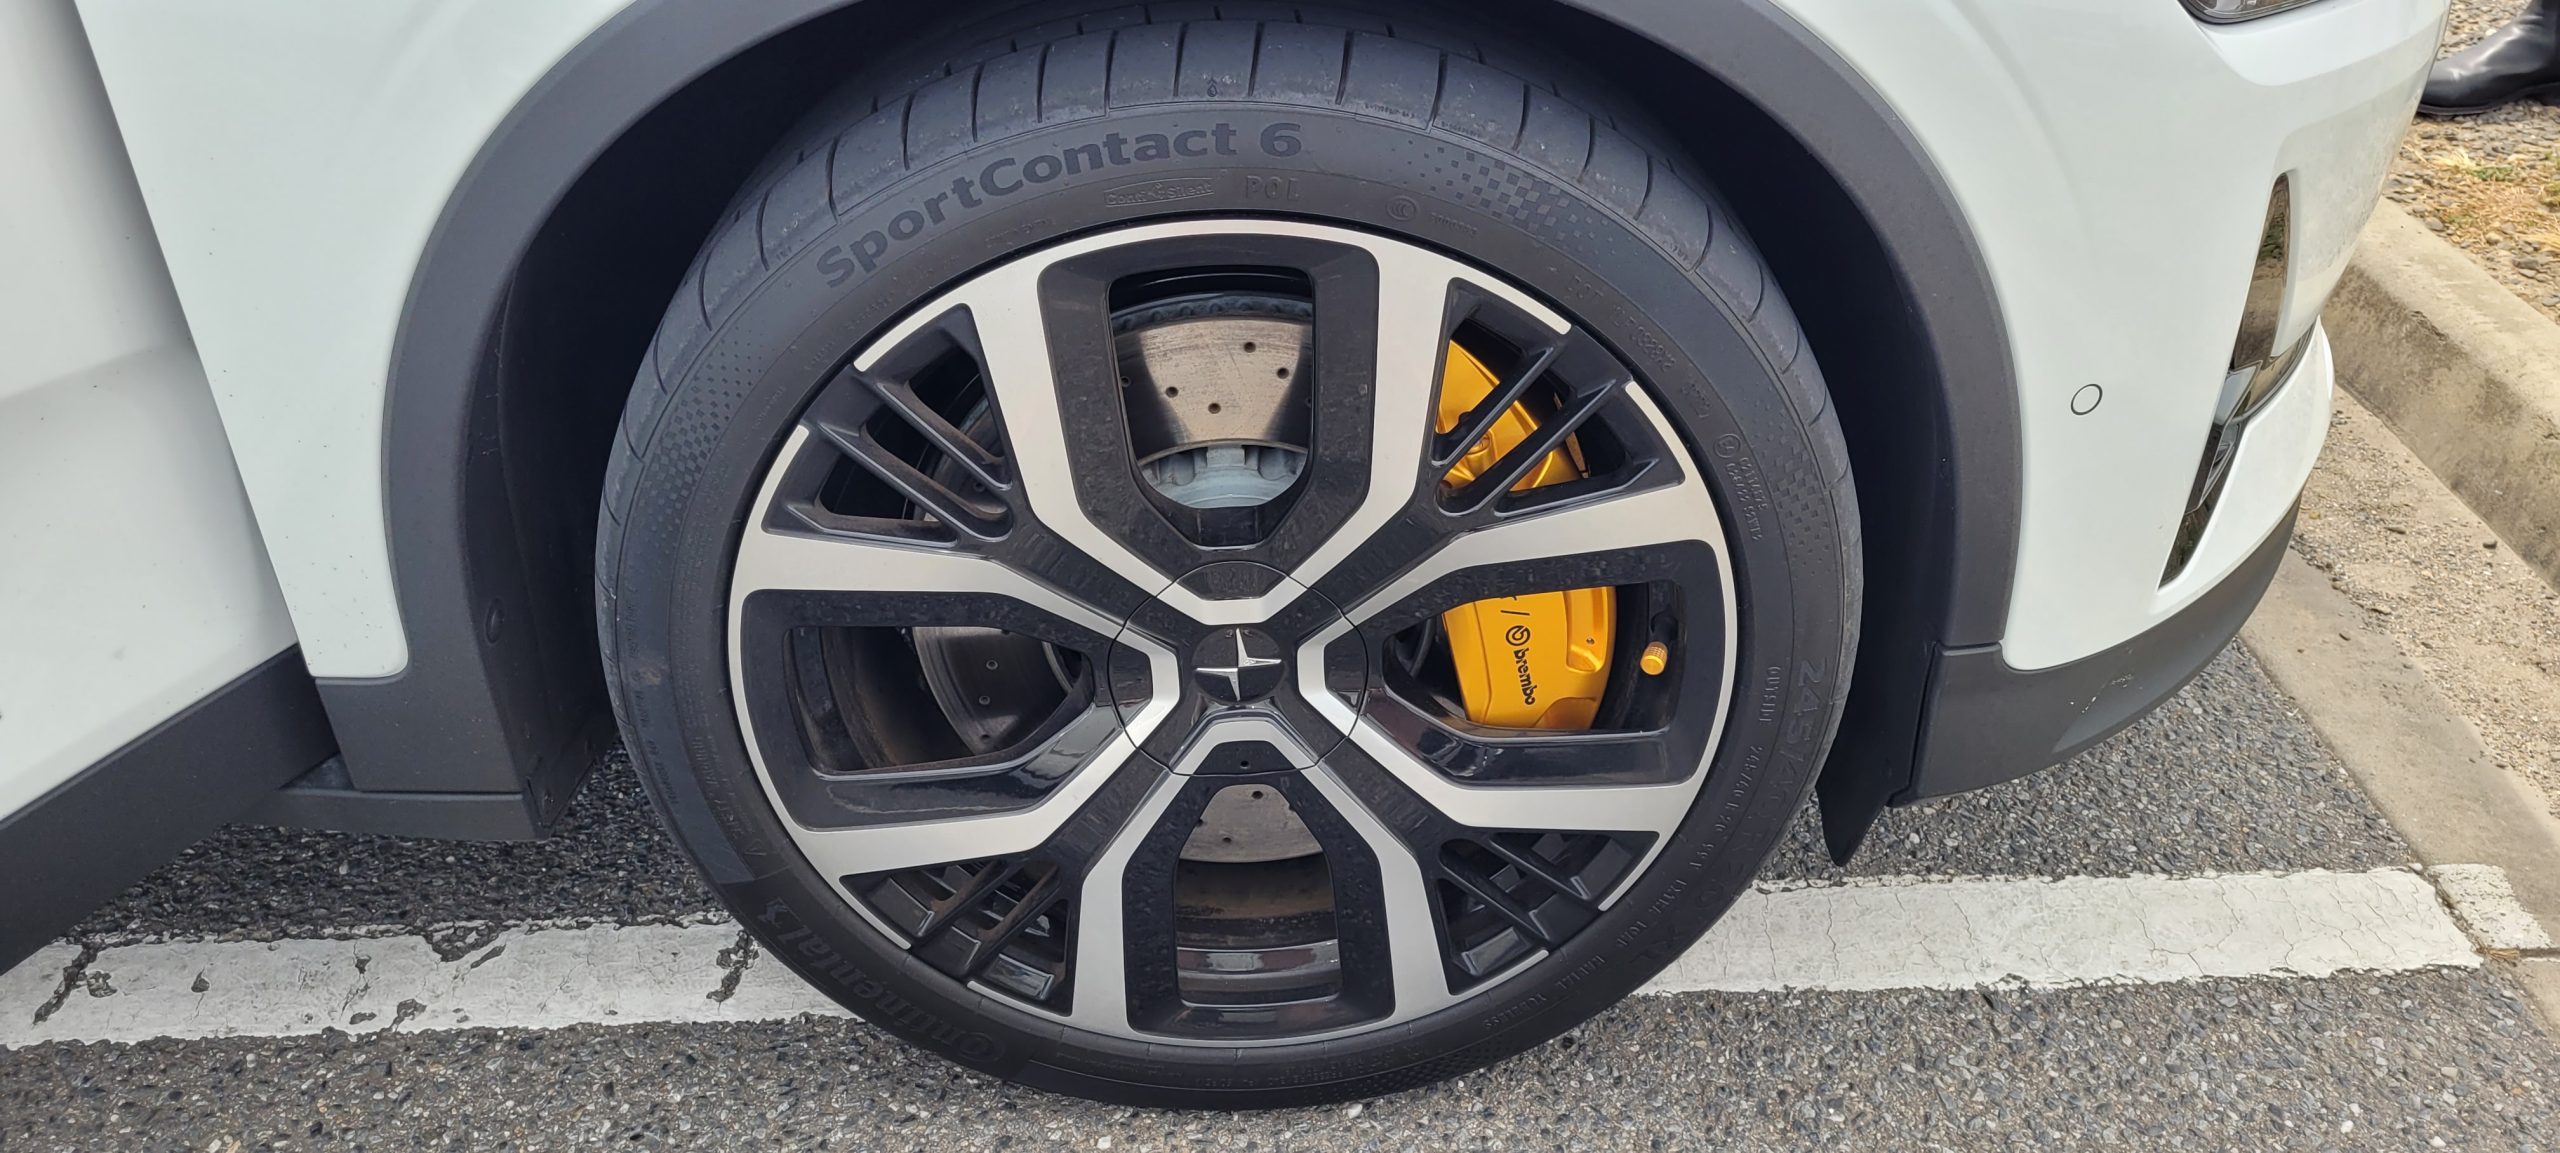 Polestar 2 20 inch rim close up of tyre and gold Brembo brakes